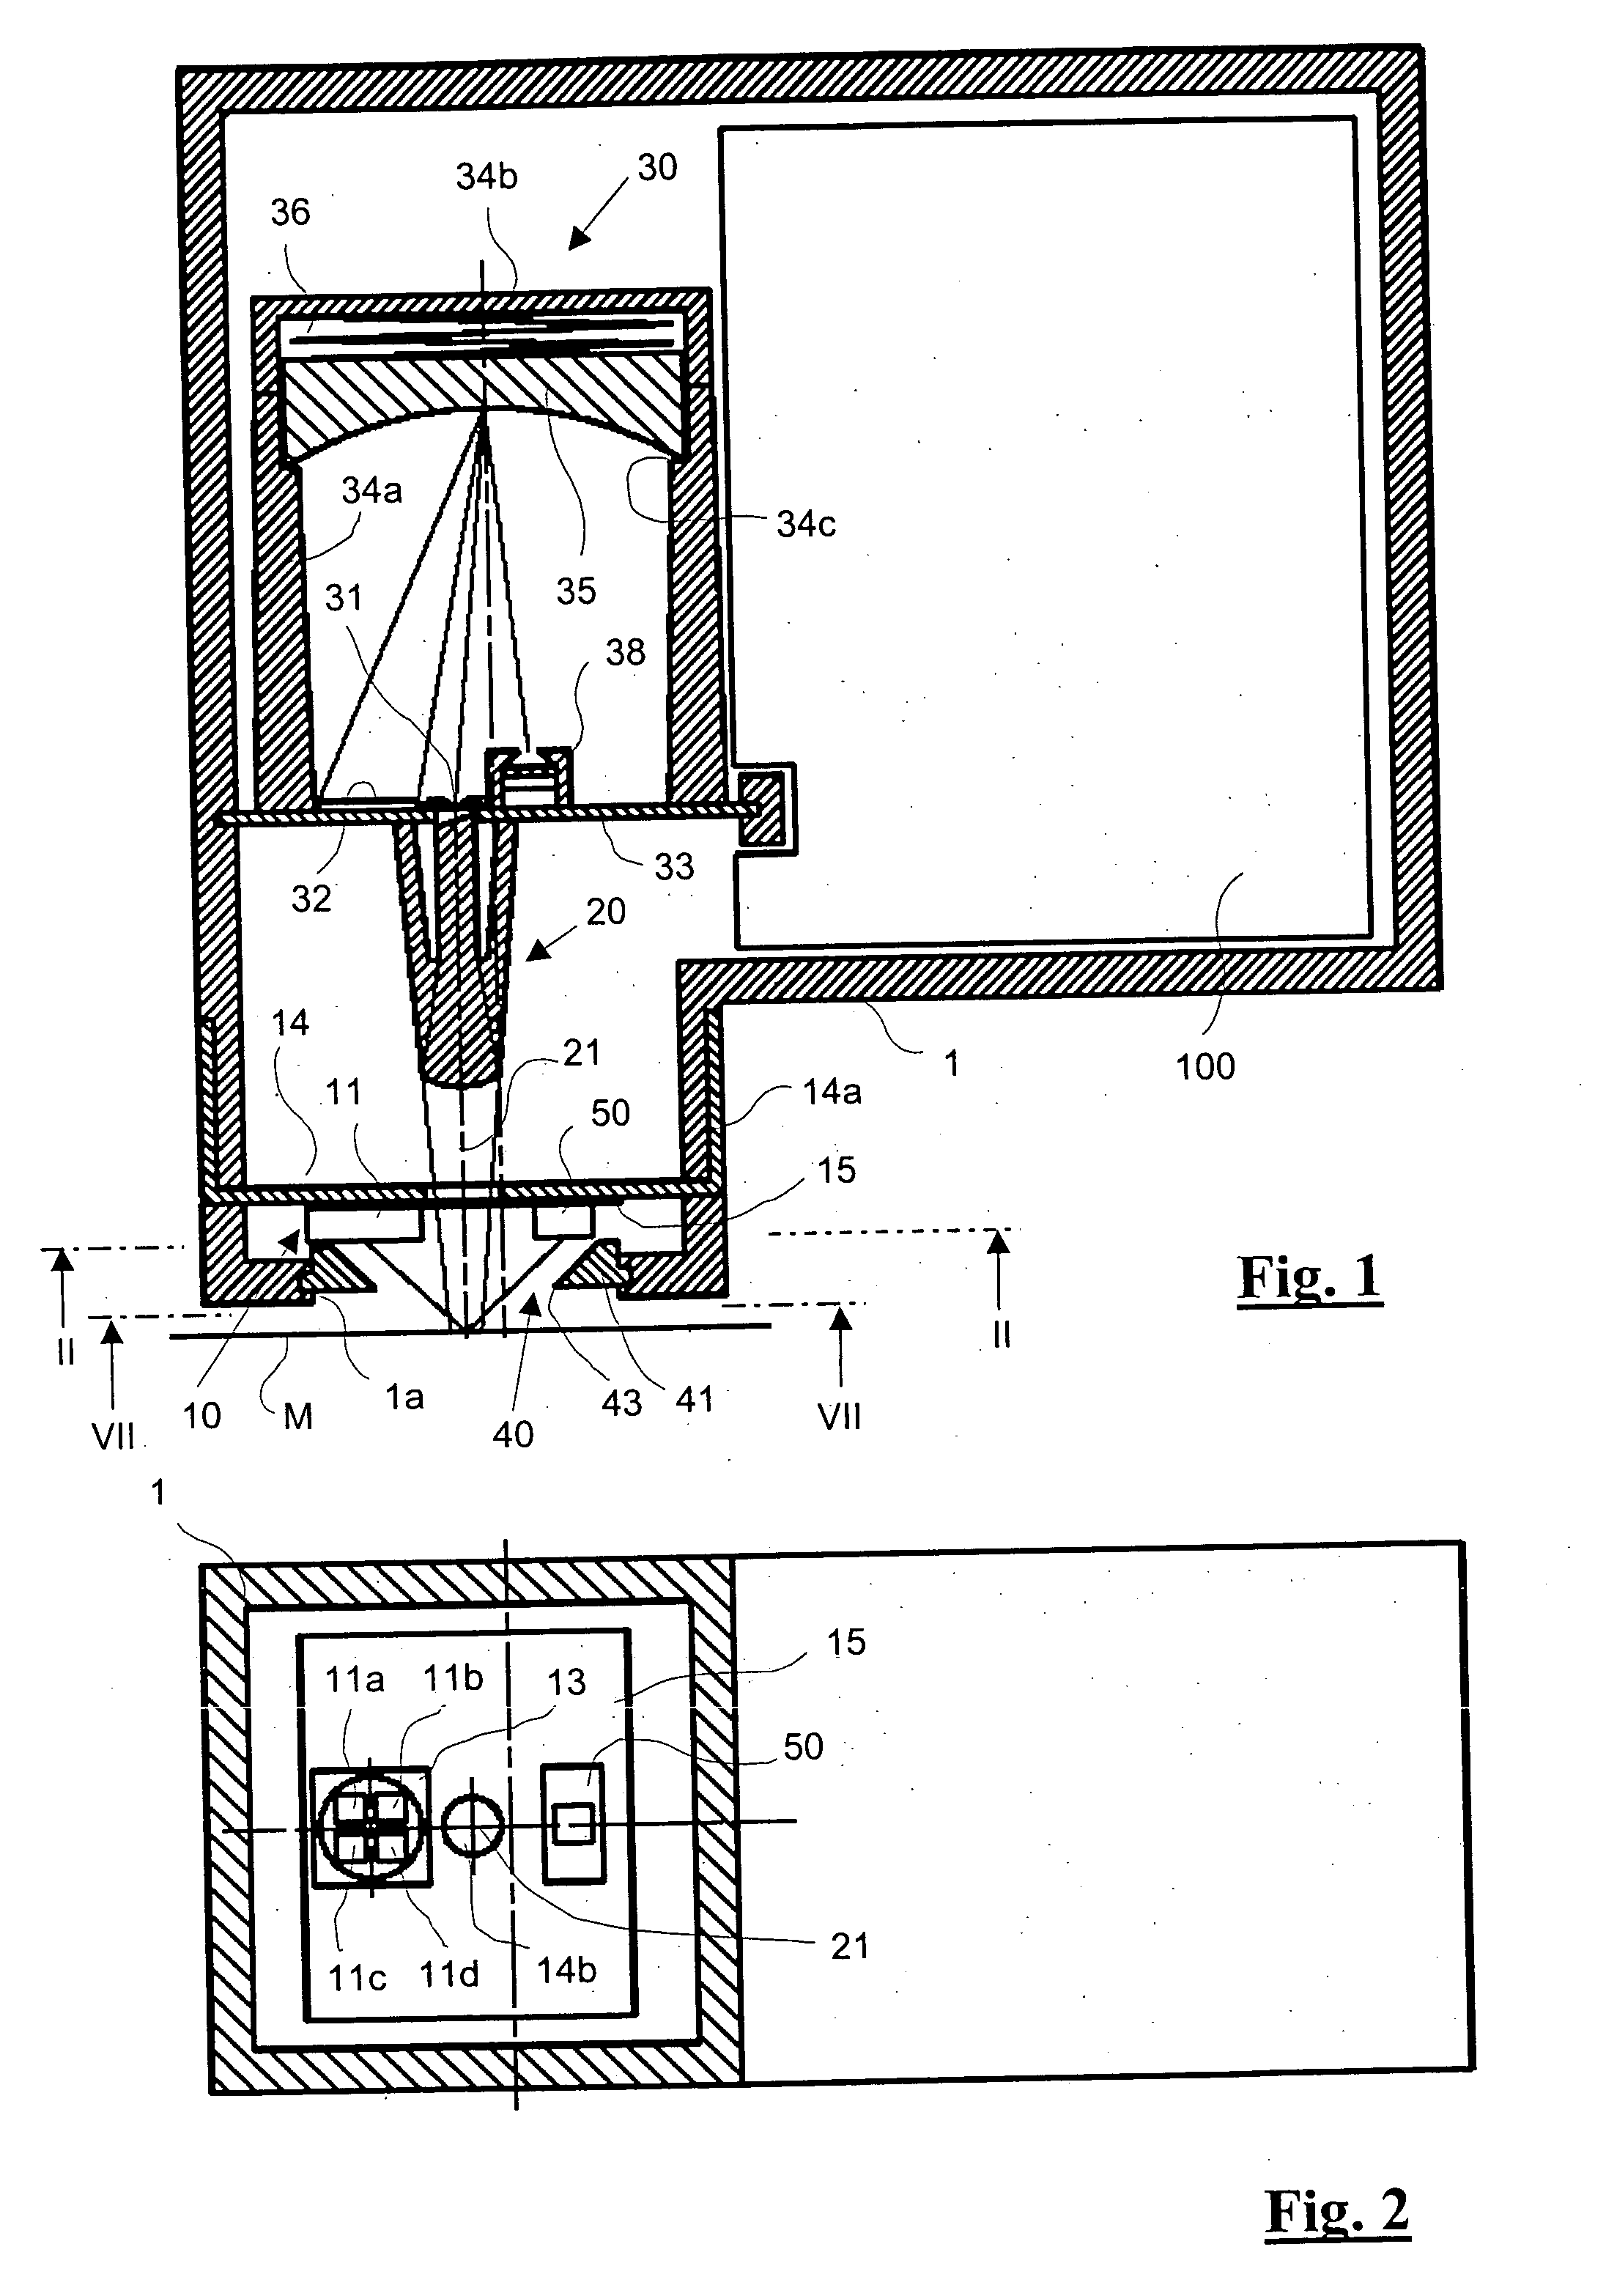 Spectral photometer and associated measuring head